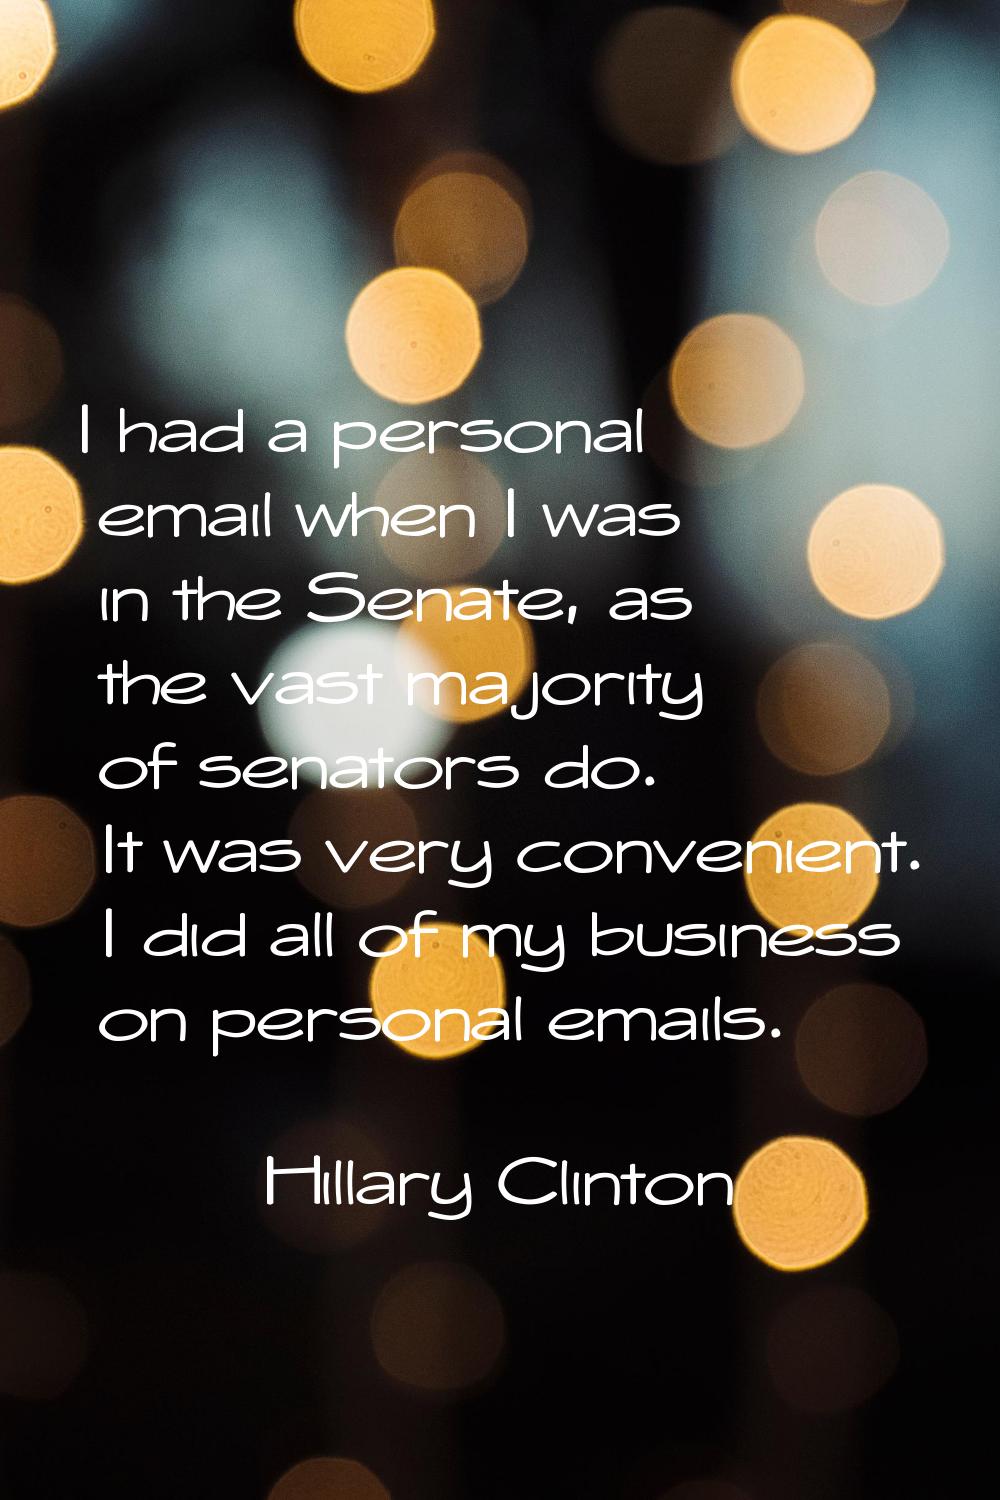 I had a personal email when I was in the Senate, as the vast majority of senators do. It was very c